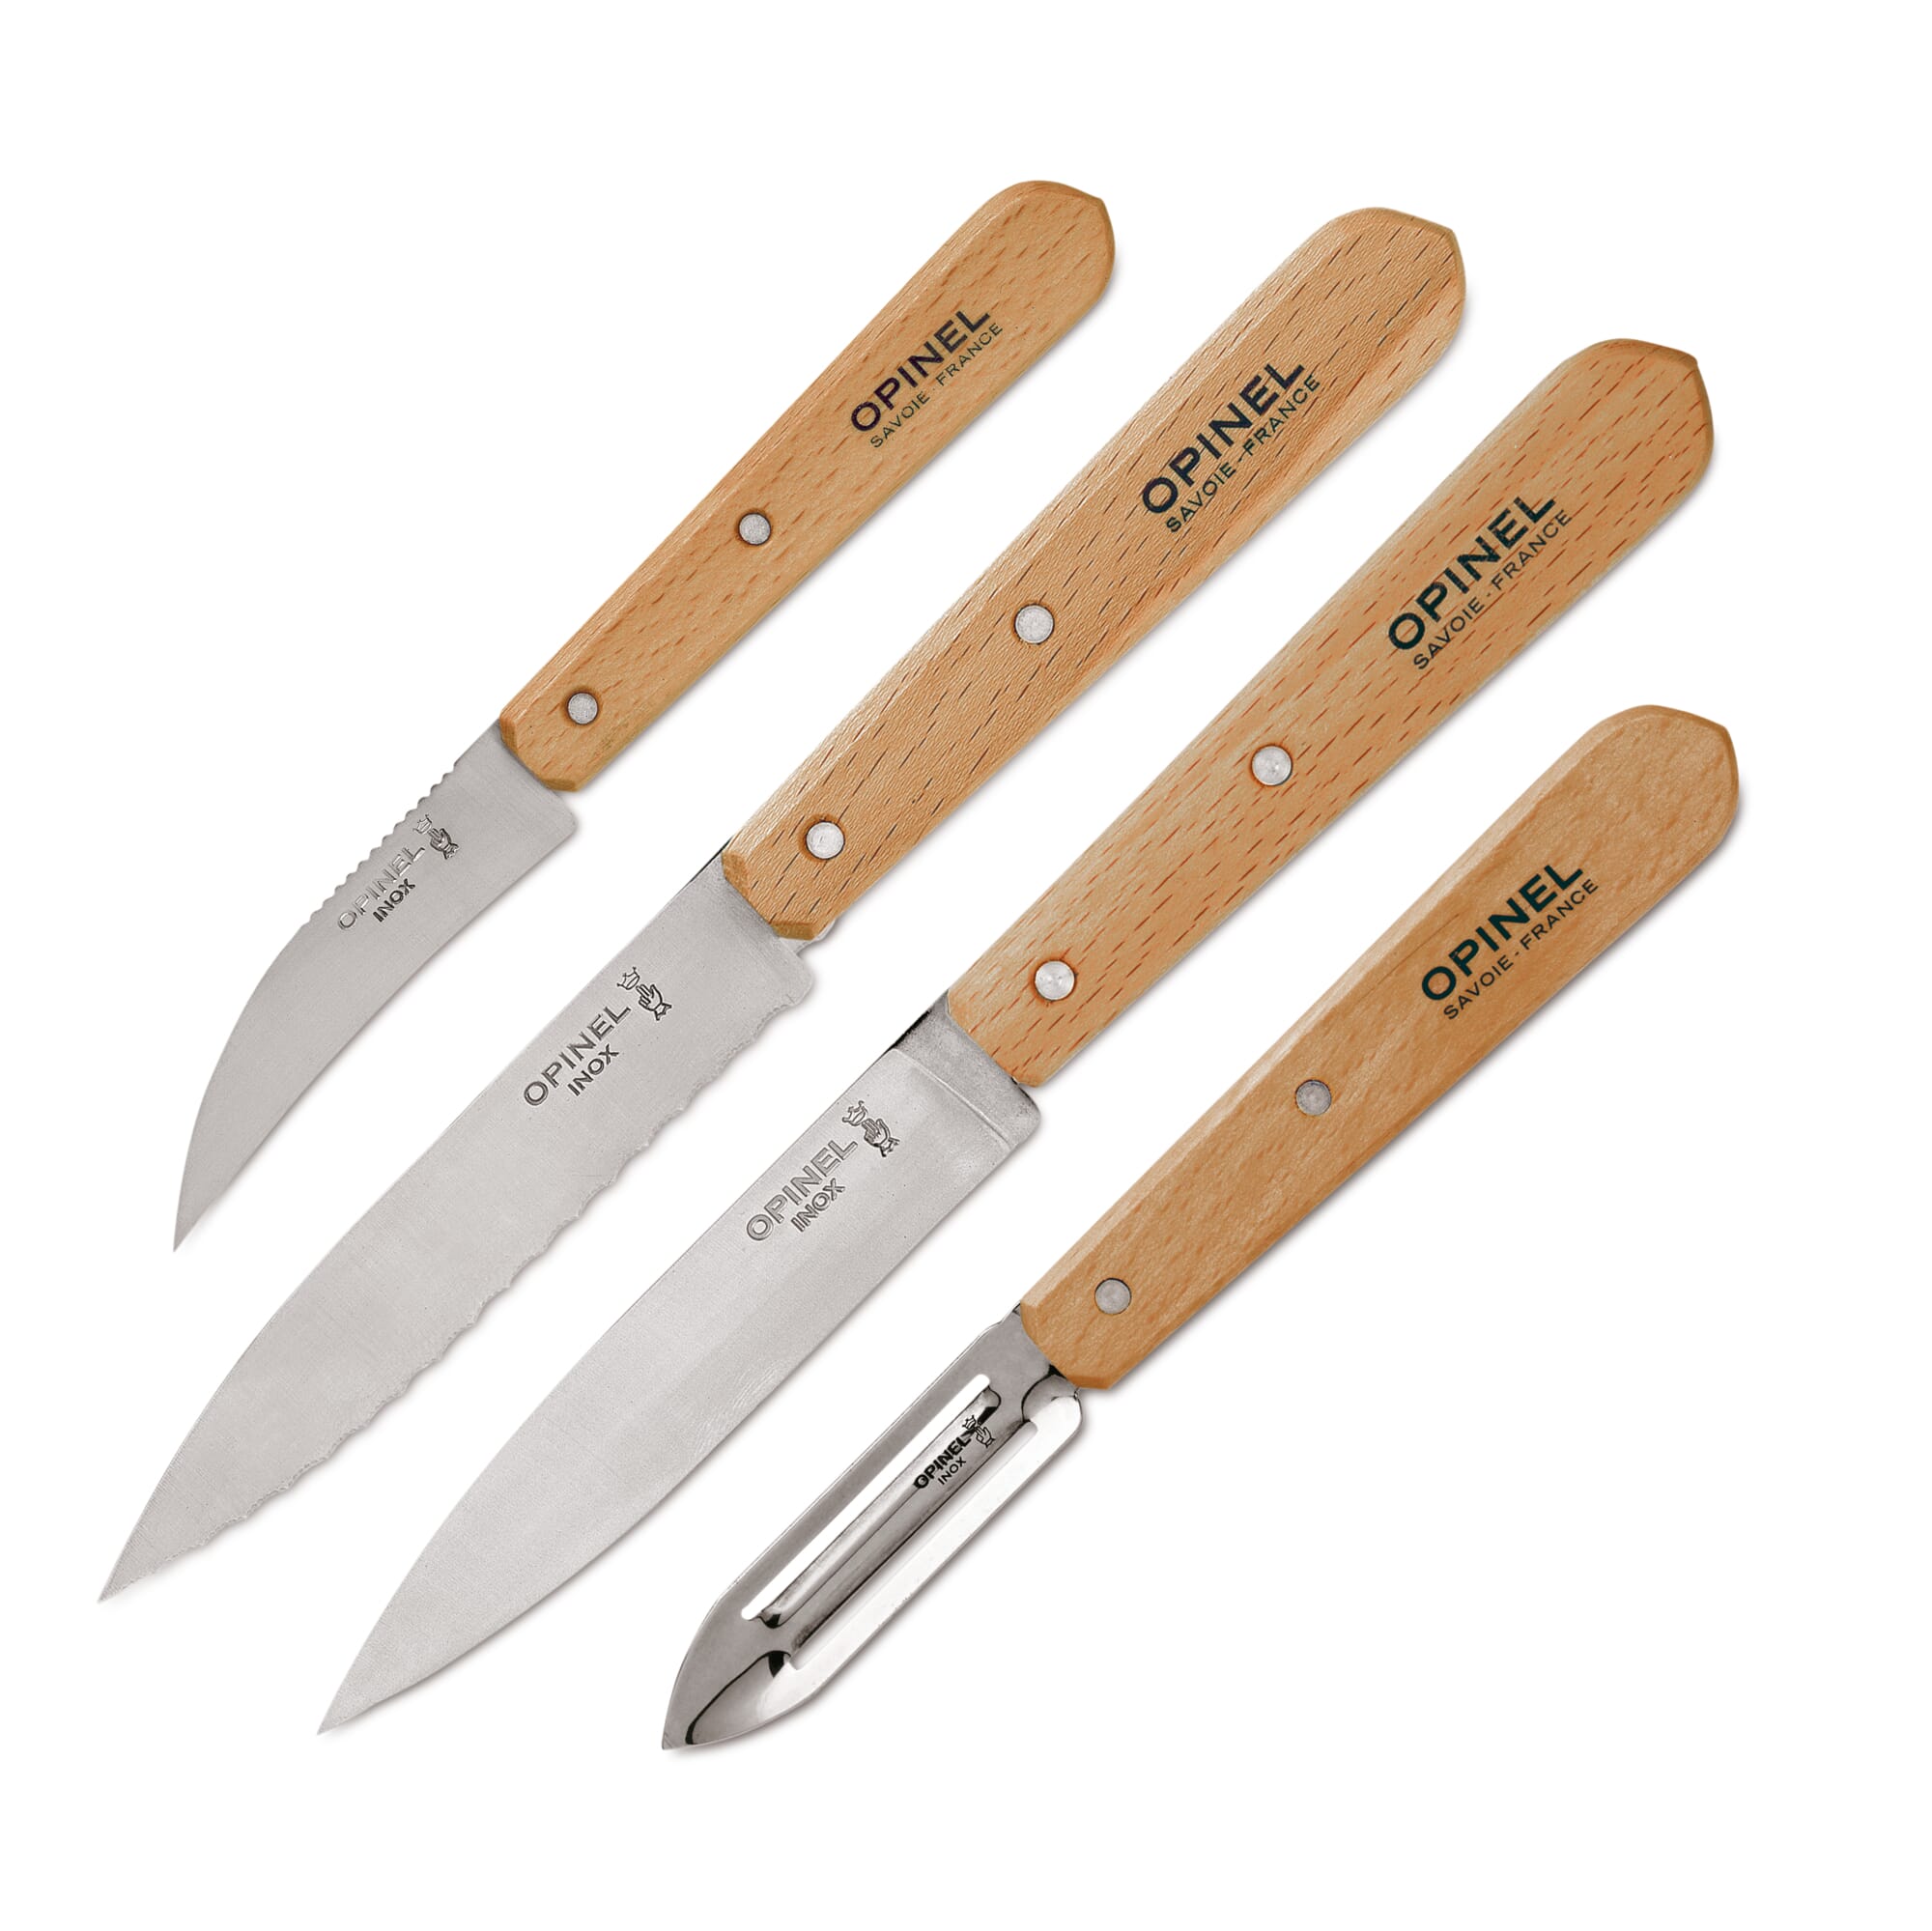 Set of 4 Opinel knives